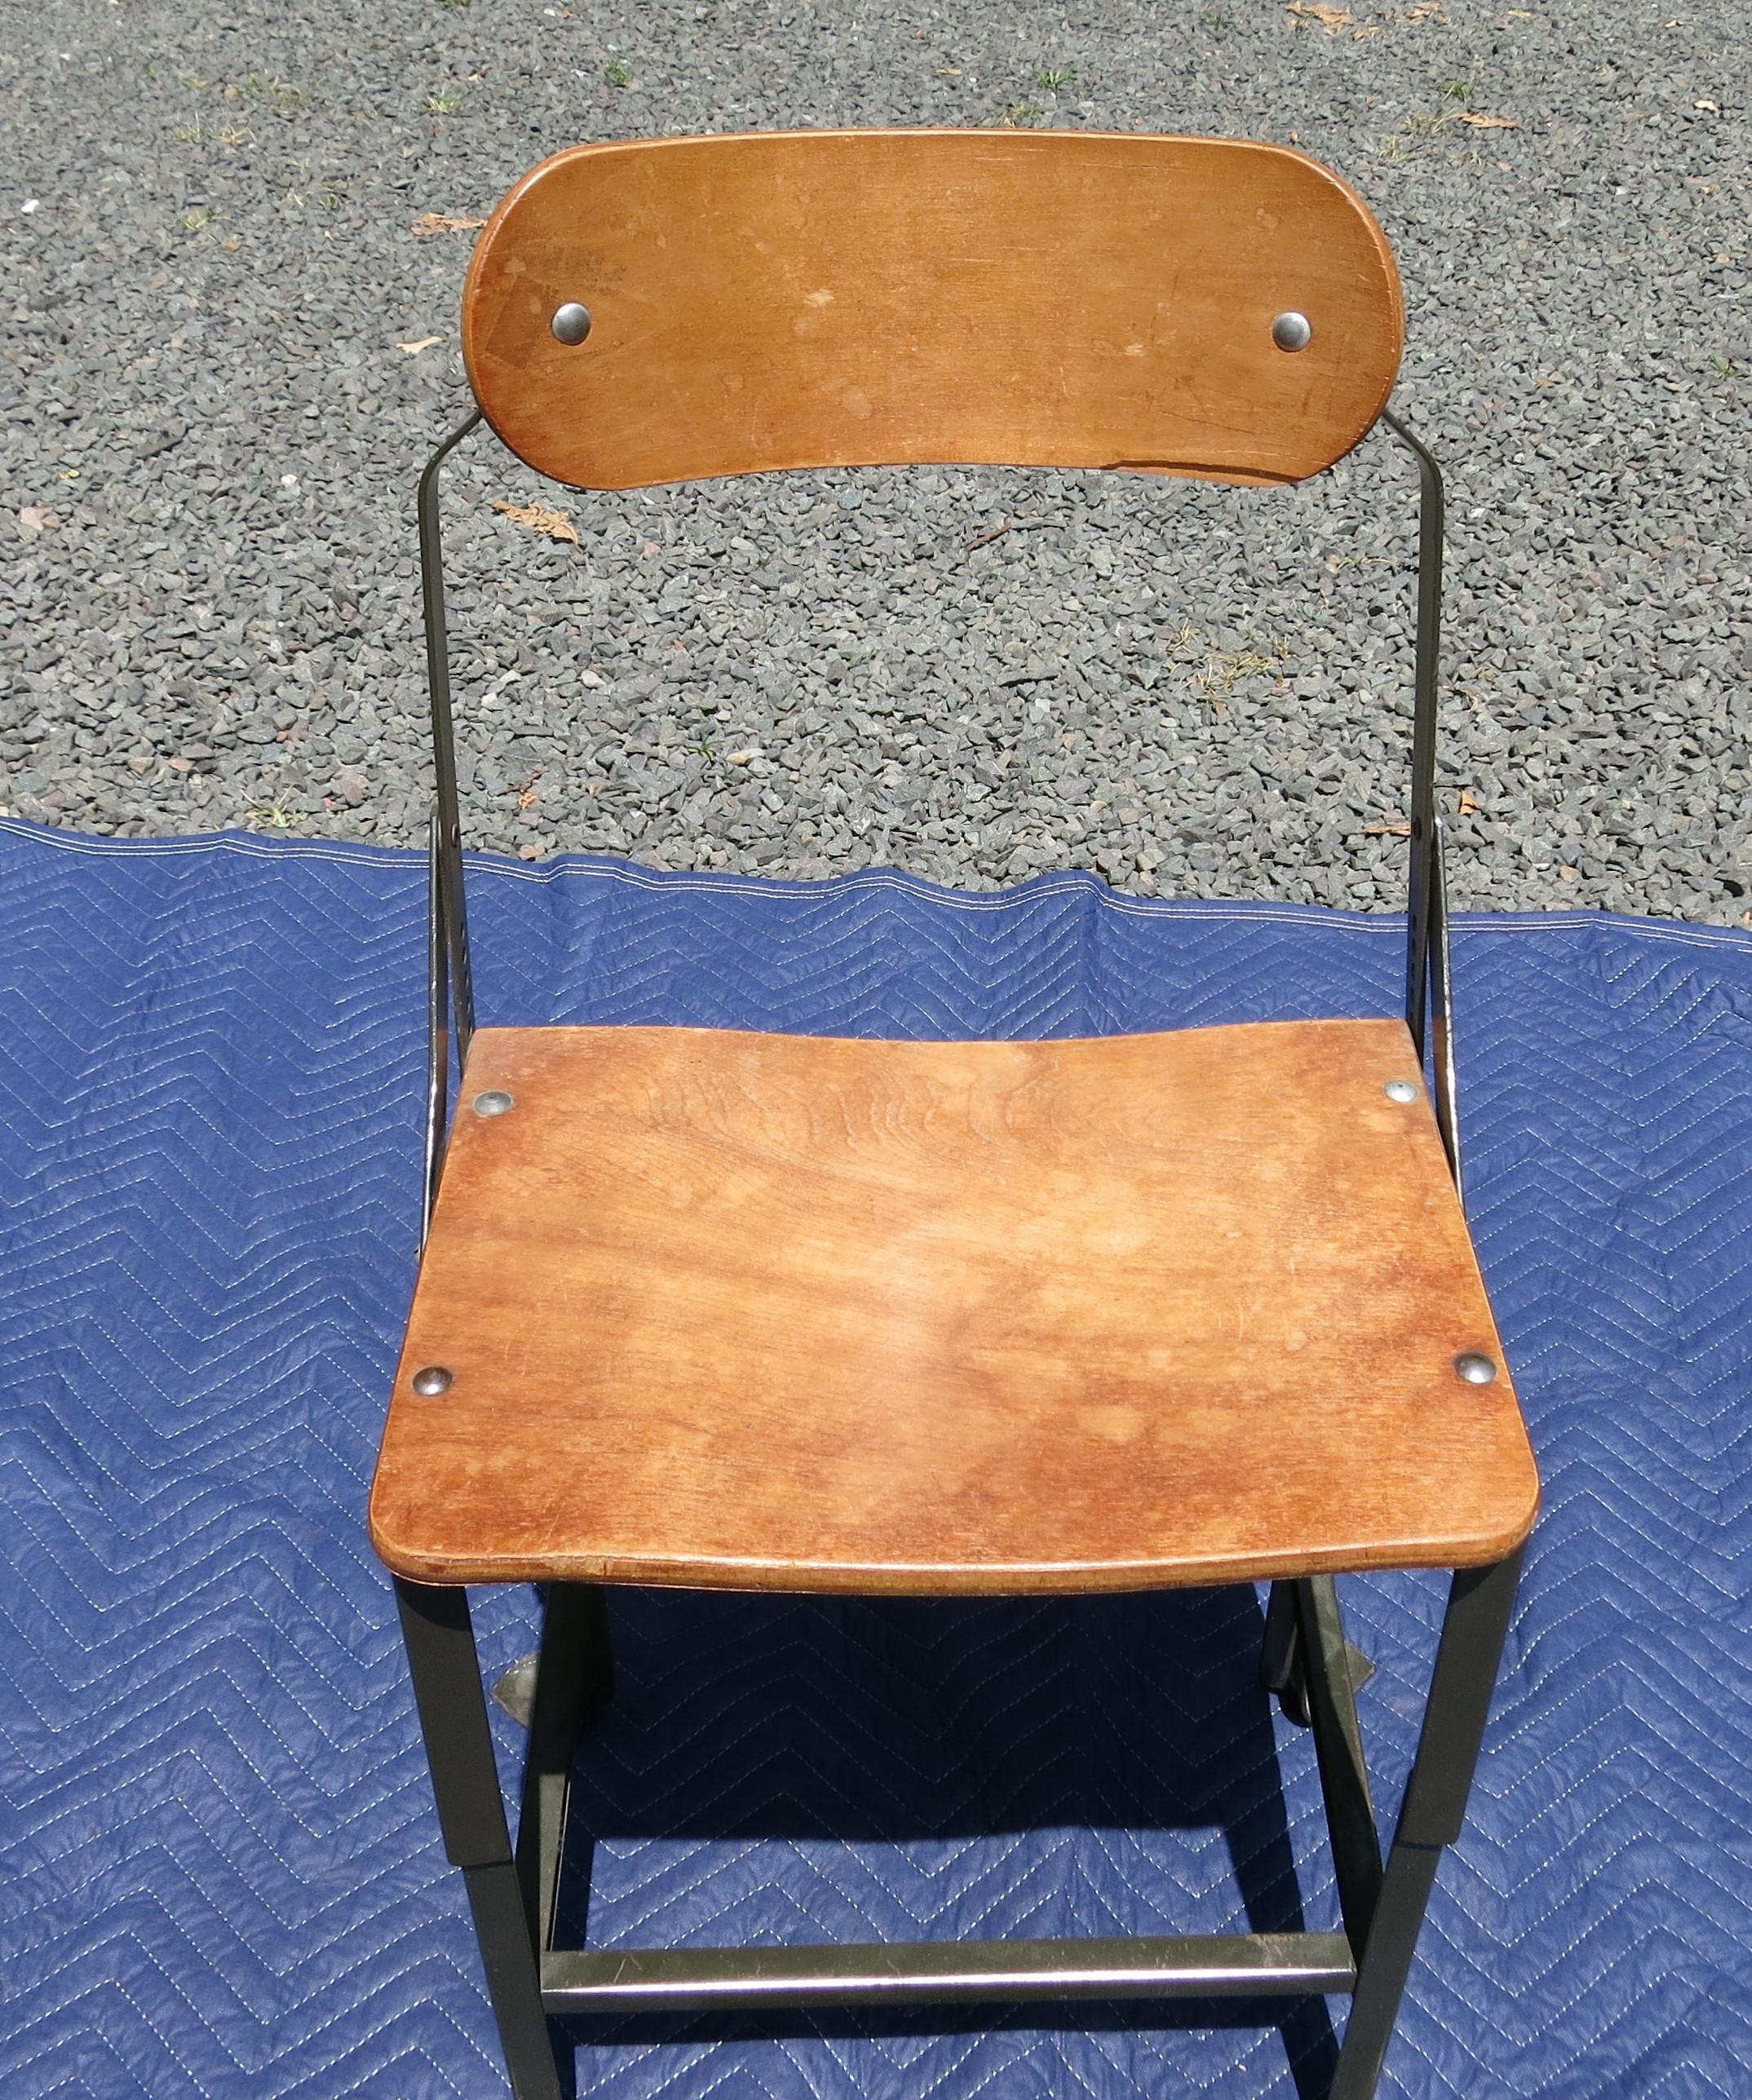 Industrial Bent plywood adjustable chair. Some veneer loss and separation. It is 33.5